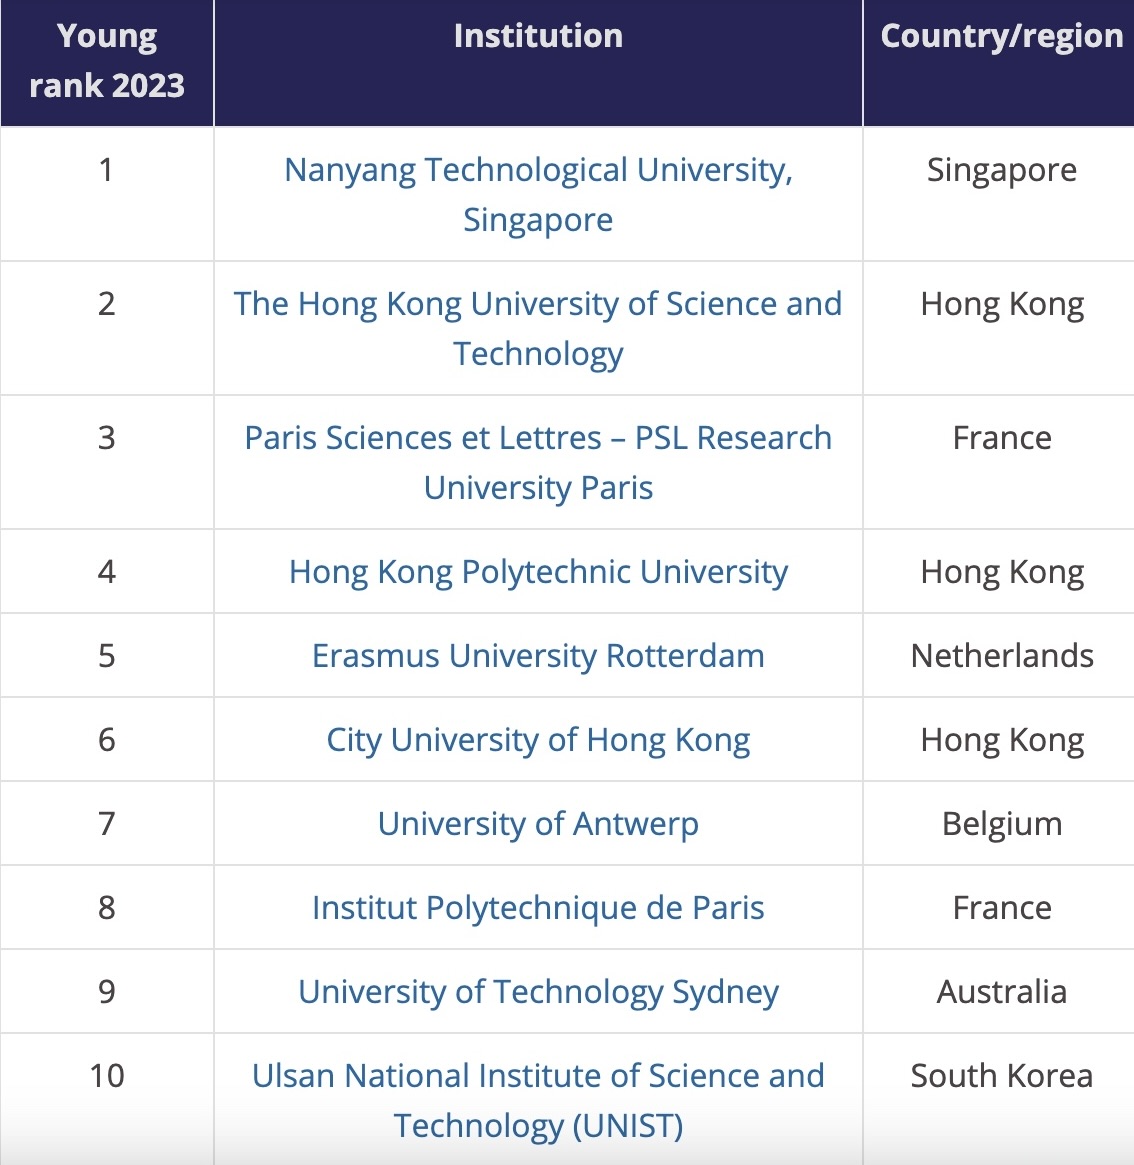 The world's Top 10 young universities under 50 years old.